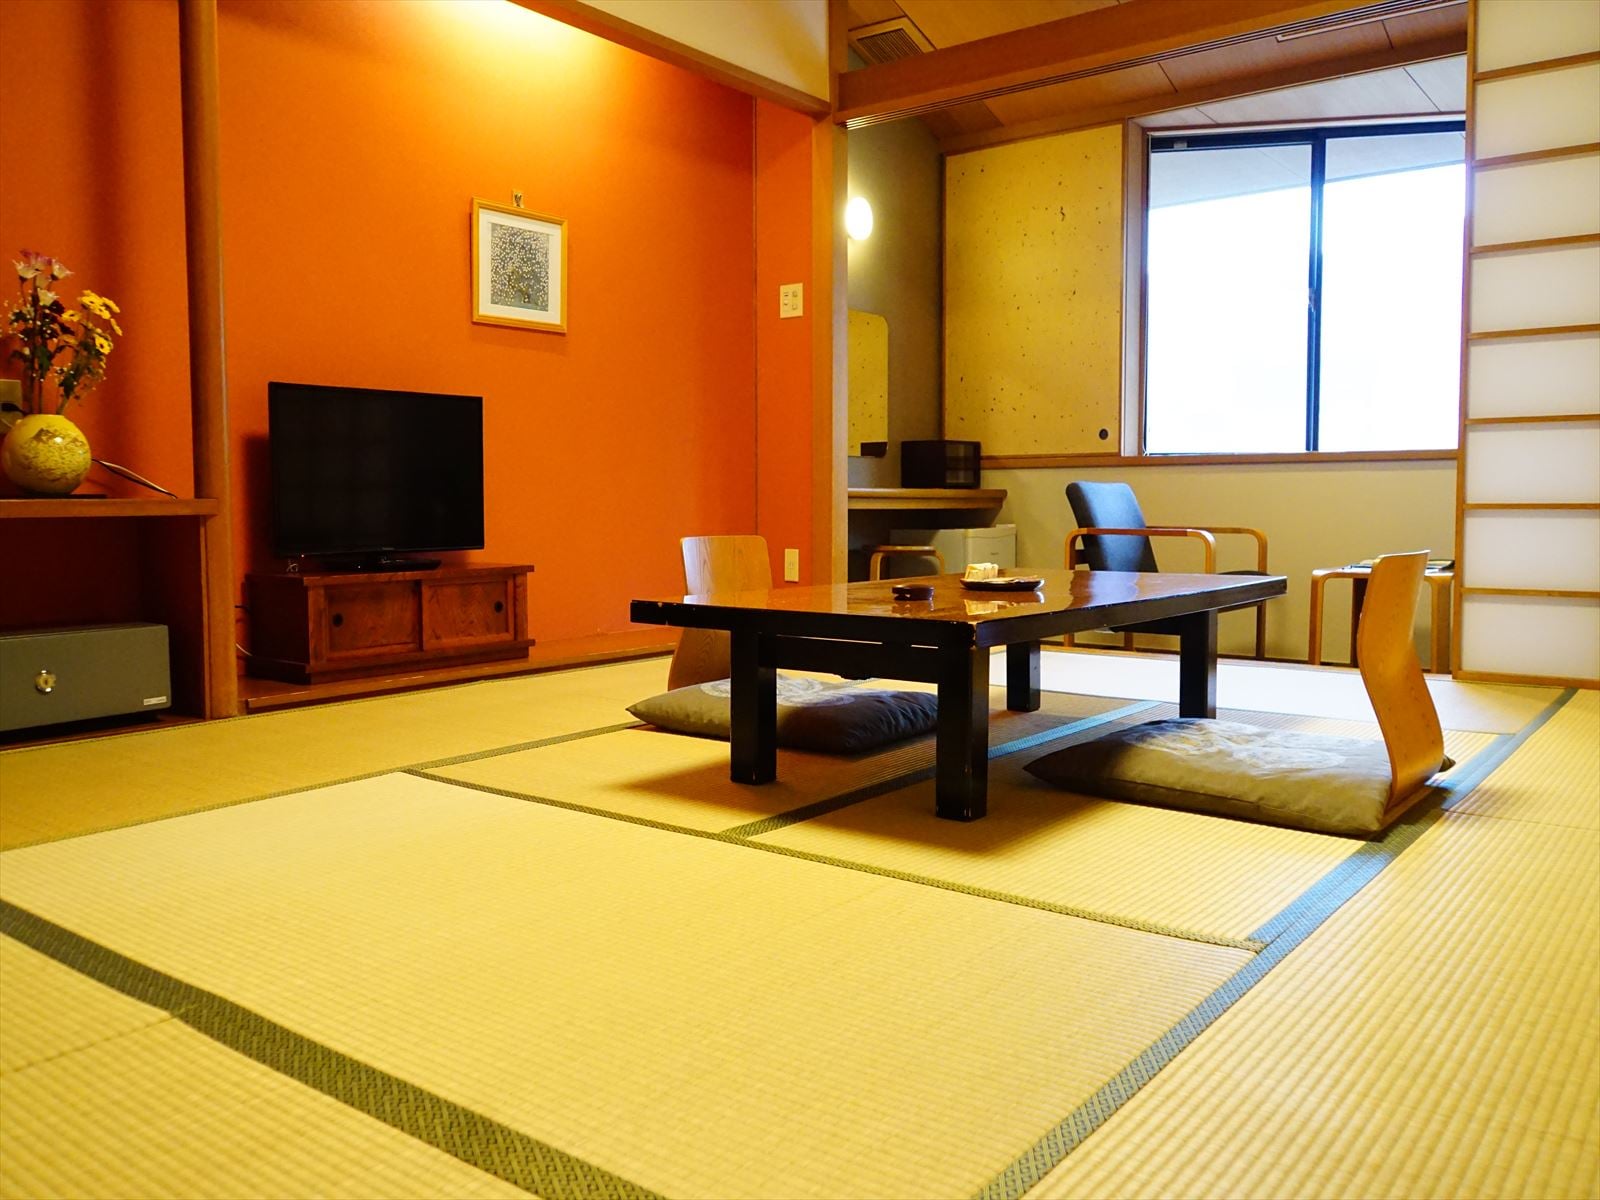 An example of a Japanese-style room (10 tatami mats)